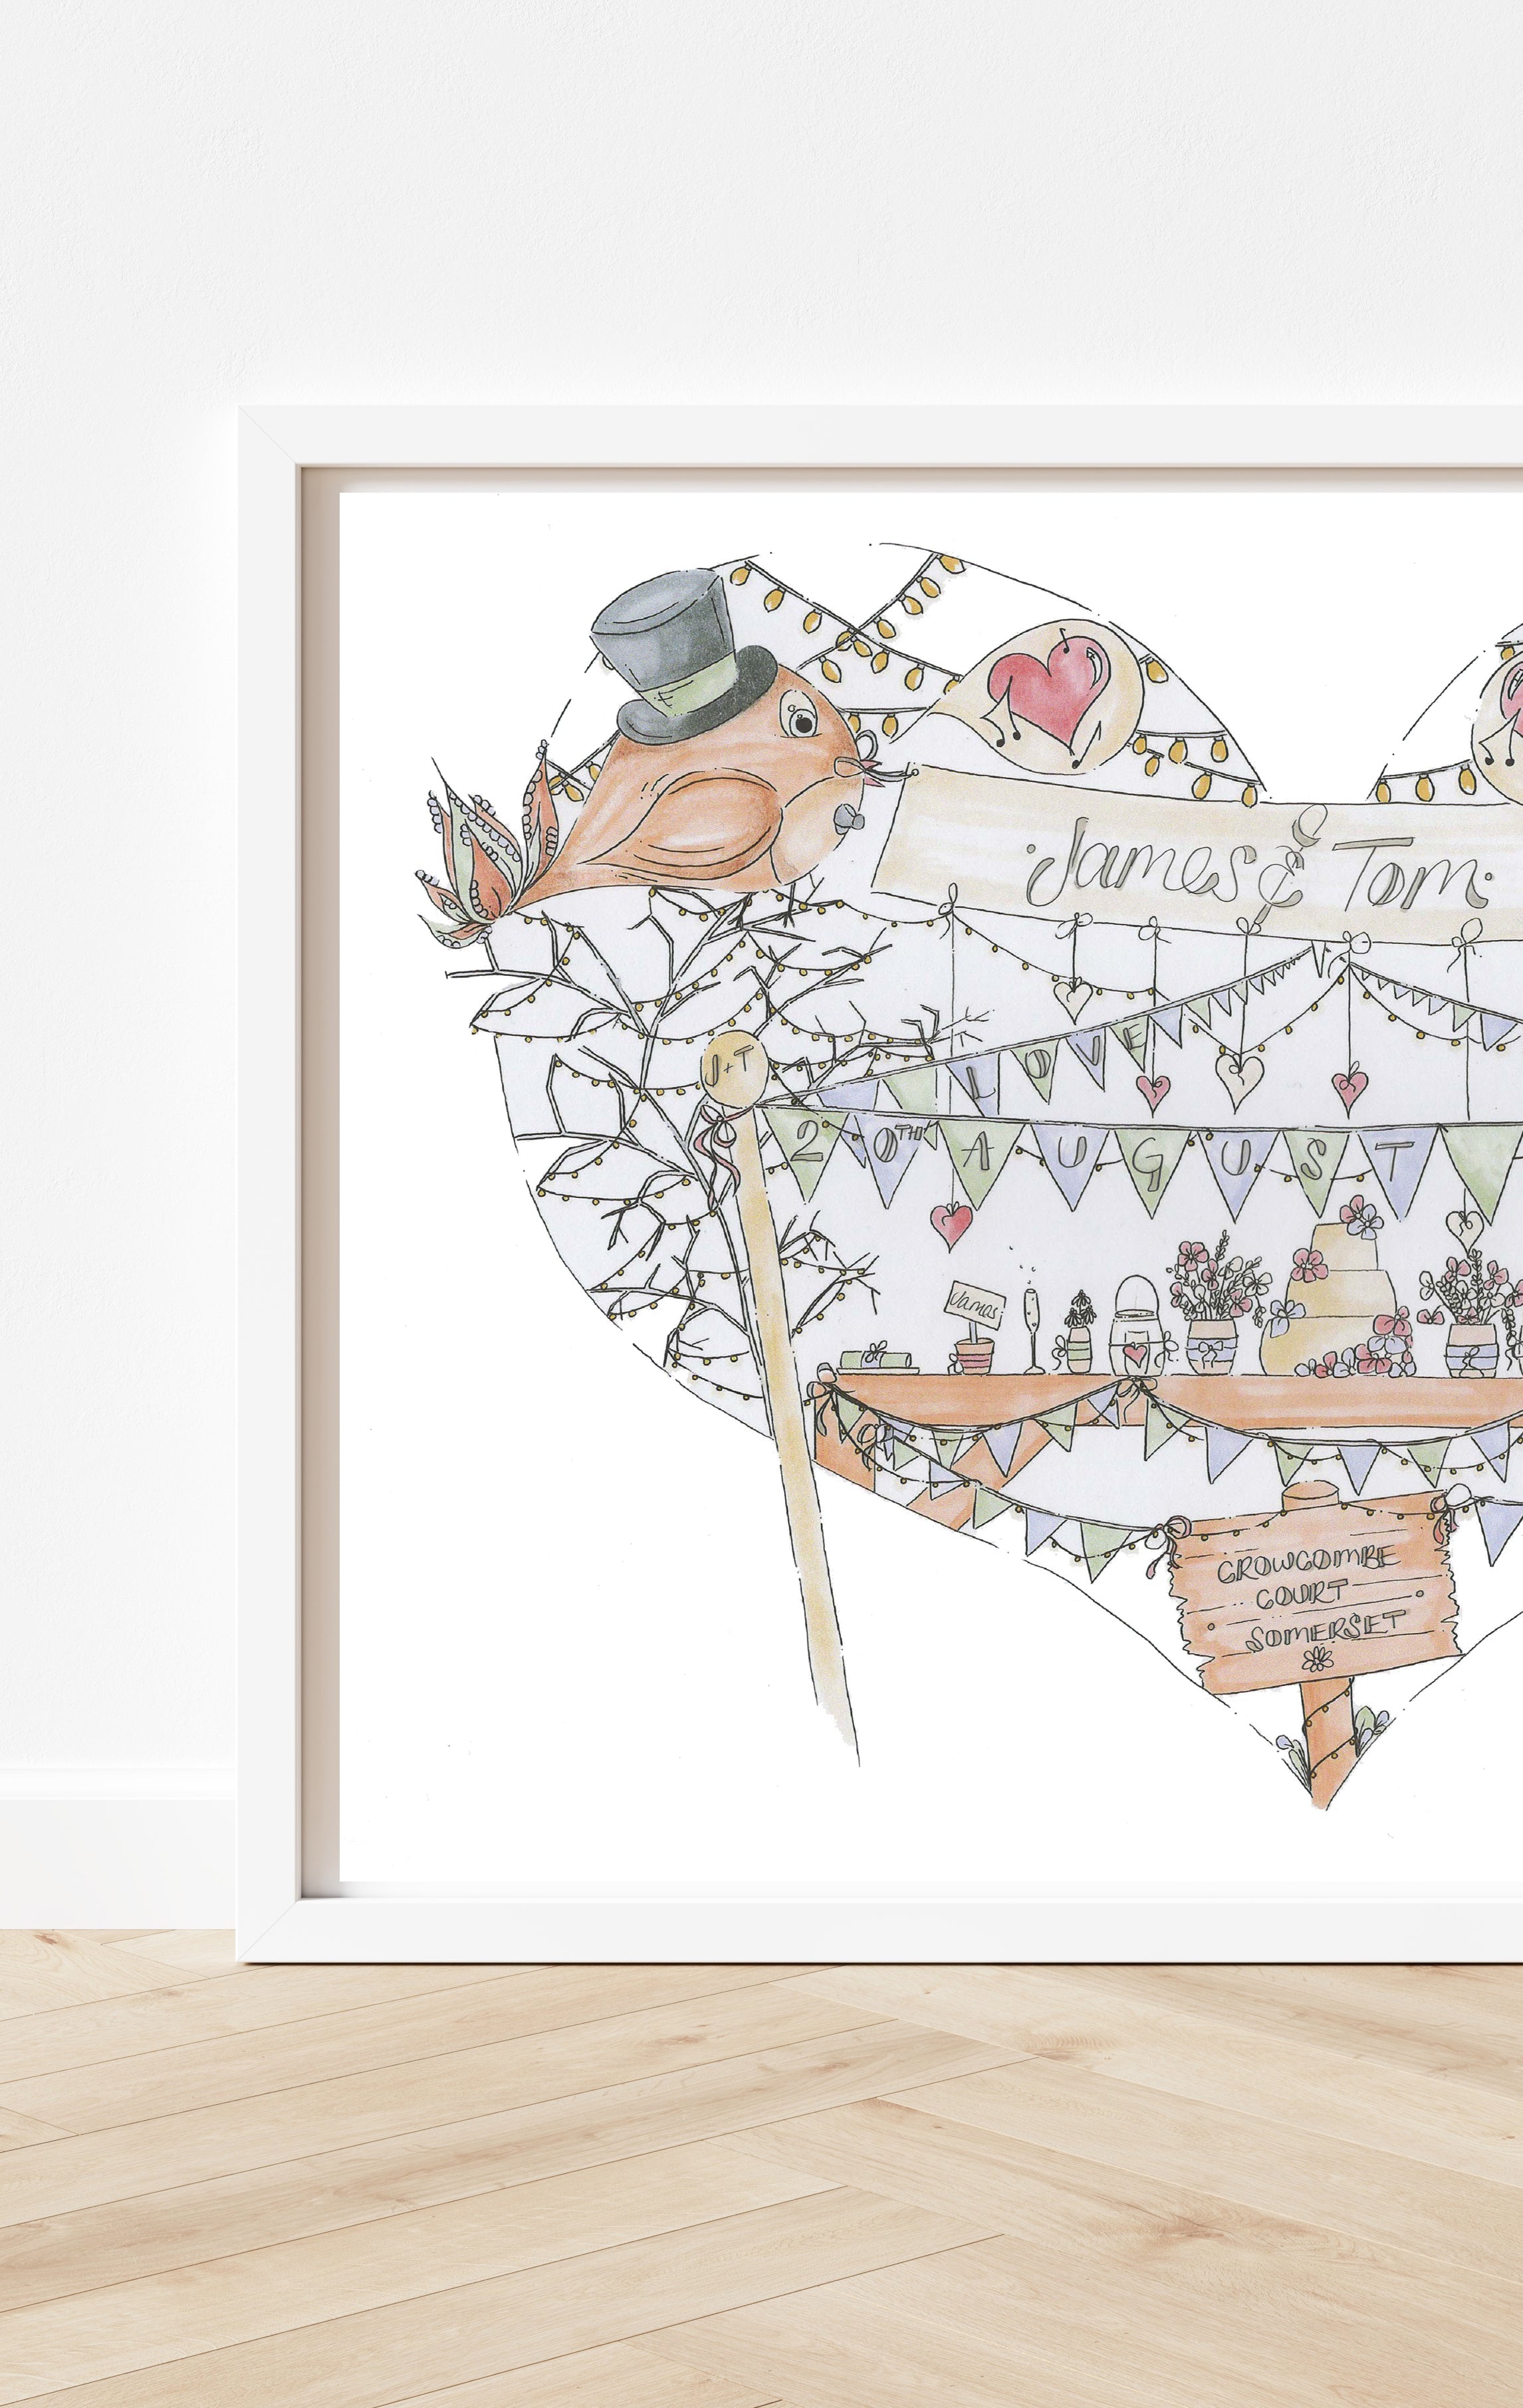 Mr and Mr Birds & Bunting Personalised Wedding Print